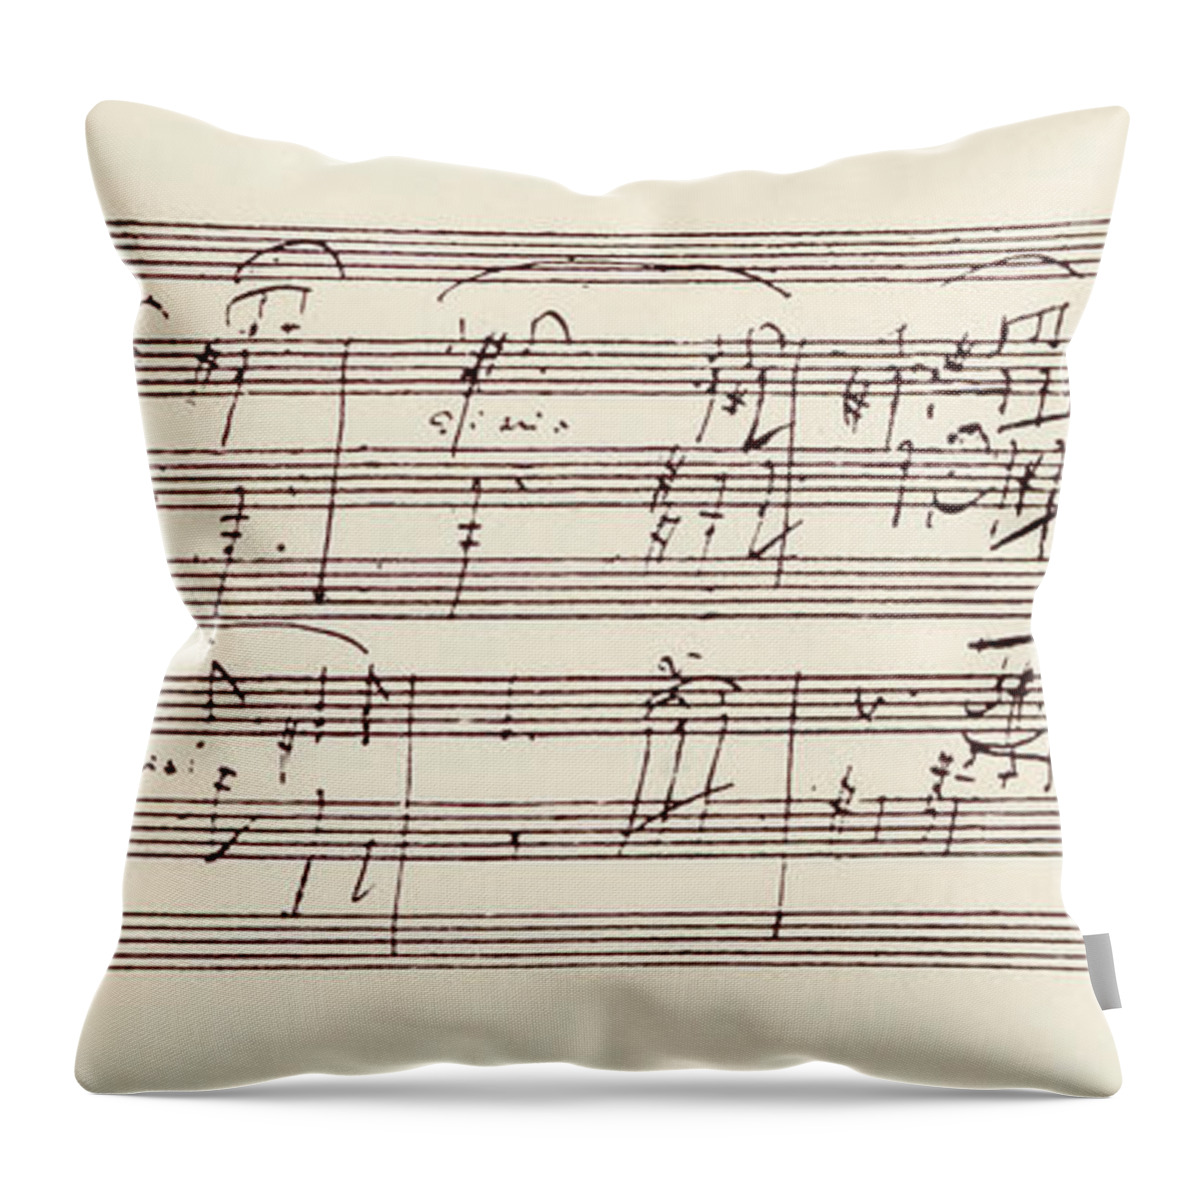 Beethoven Throw Pillow featuring the drawing Portion of the Manuscript of Beethoven's Sonata in A, Opus 101 by Beethoven